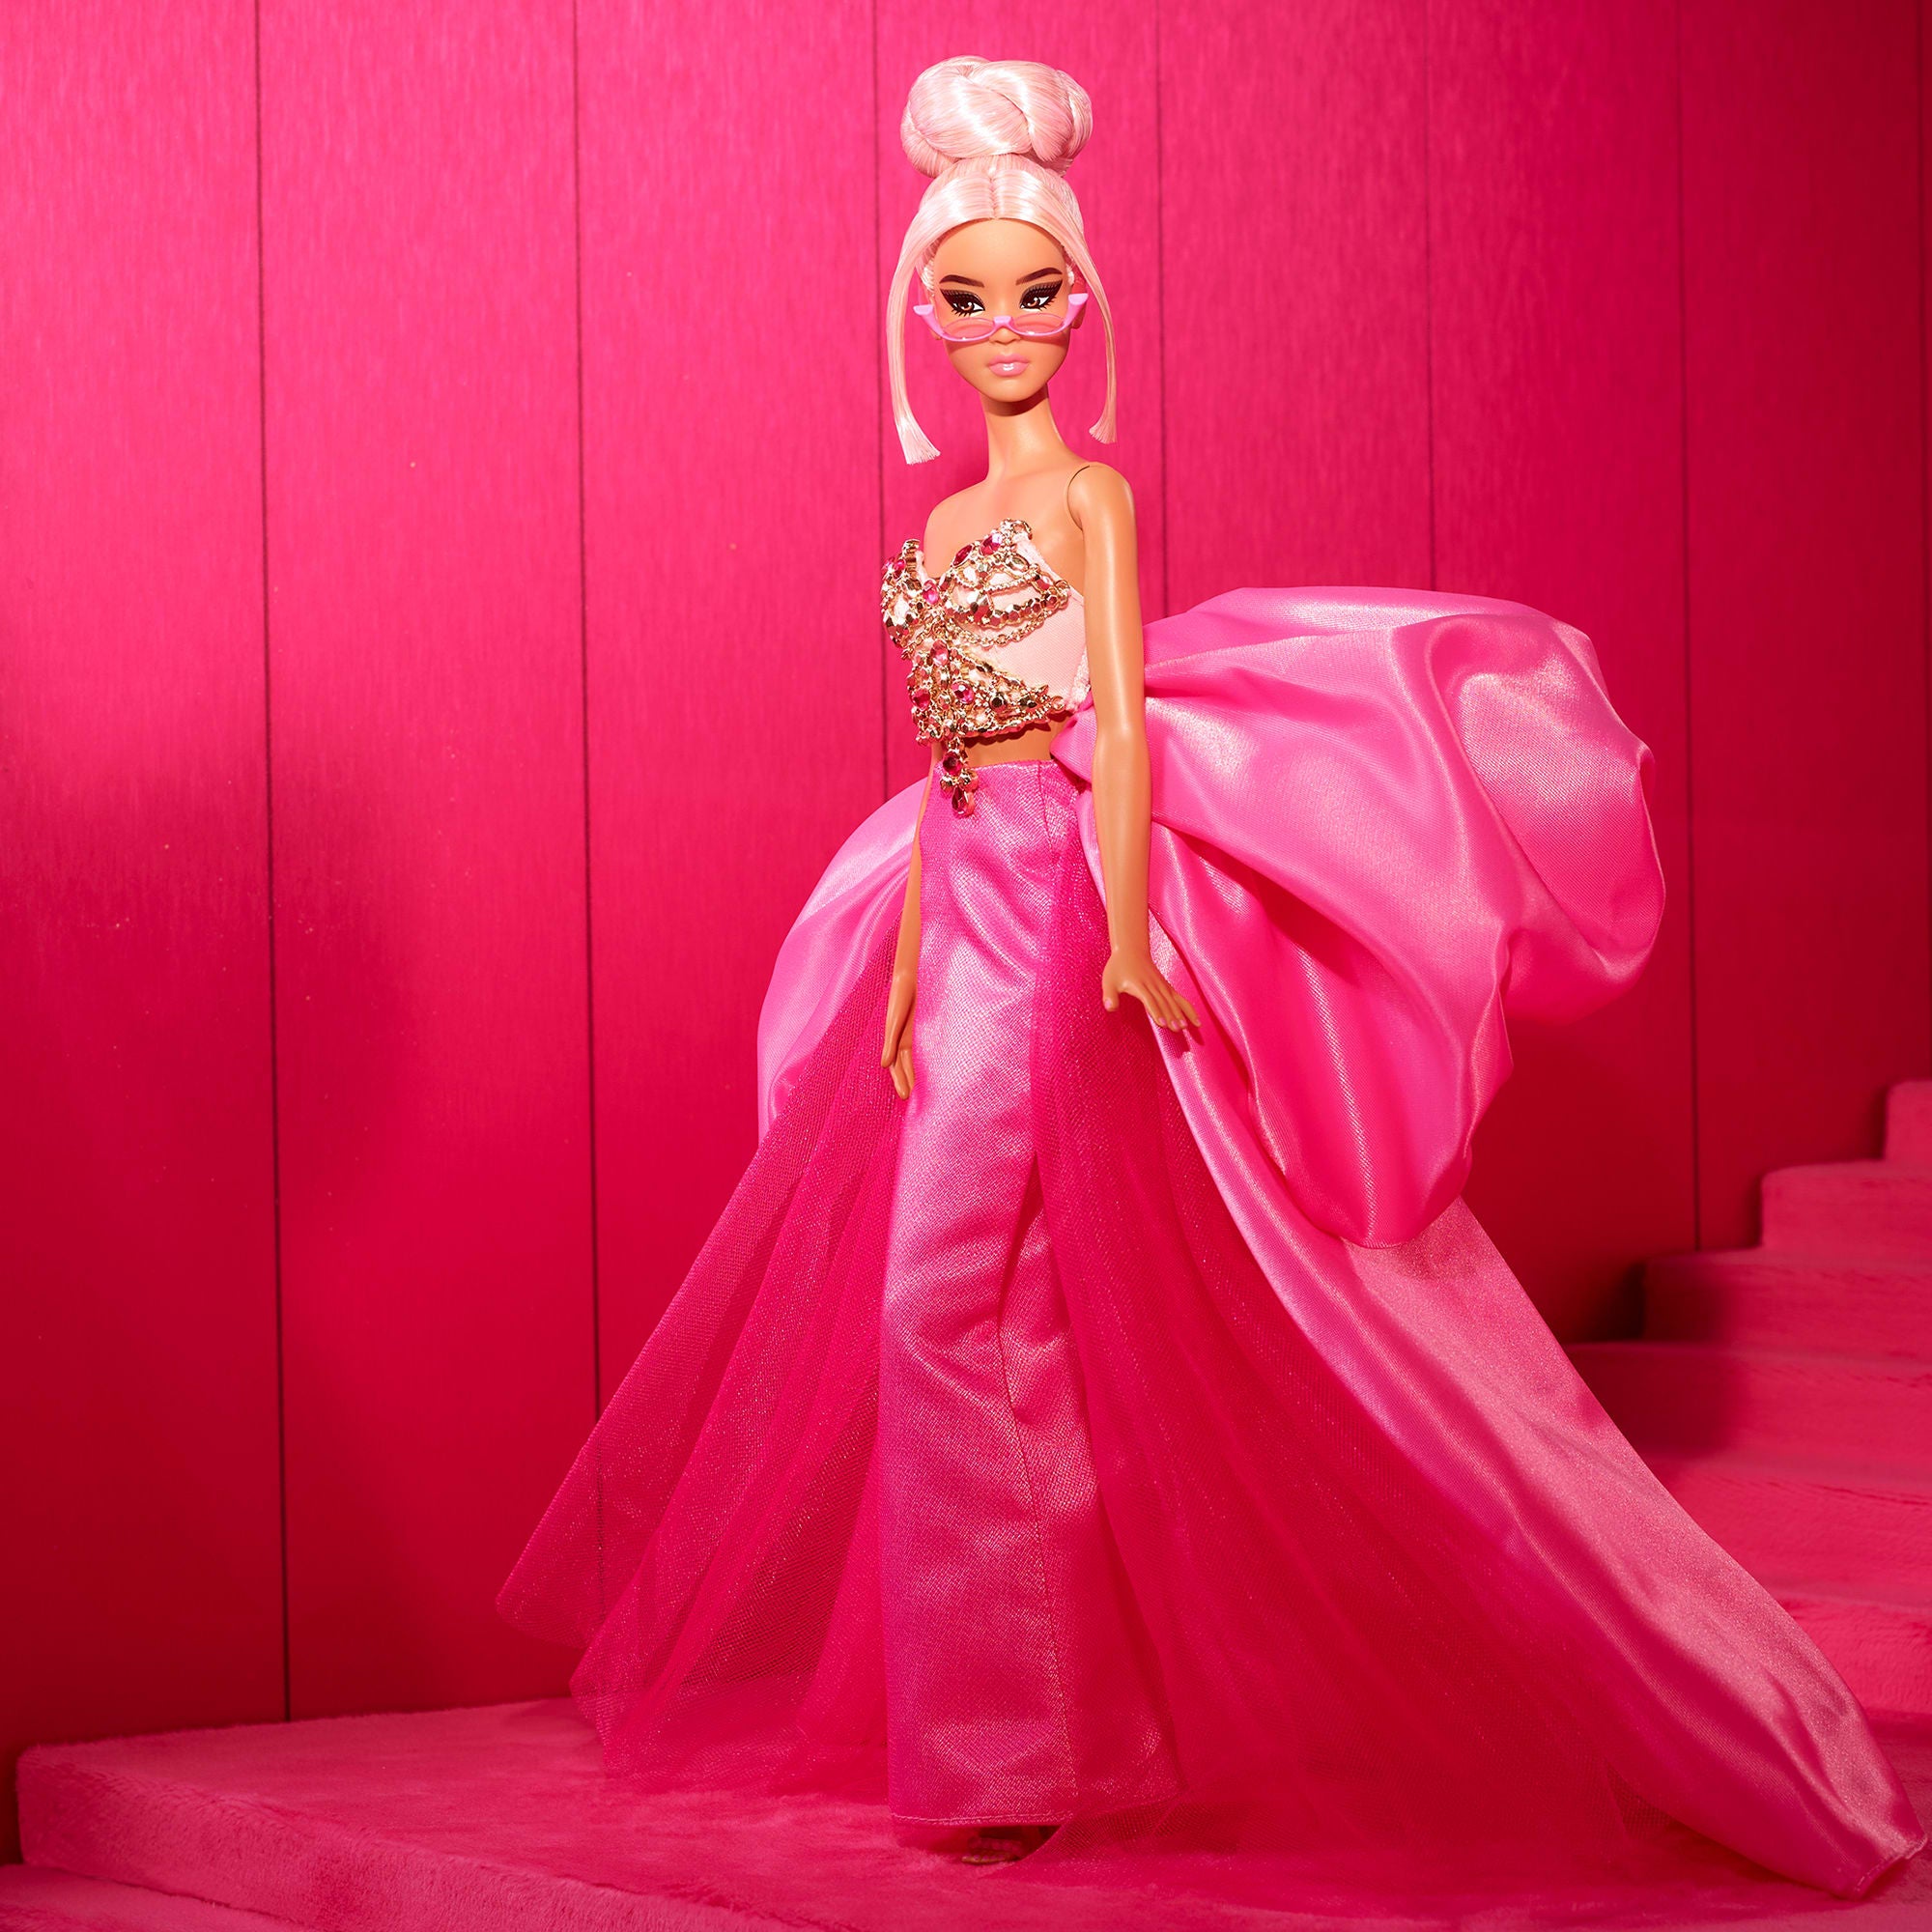 Amazon.com: Doll Barbie Pink and Fabulous Gown Set : Toys & Games